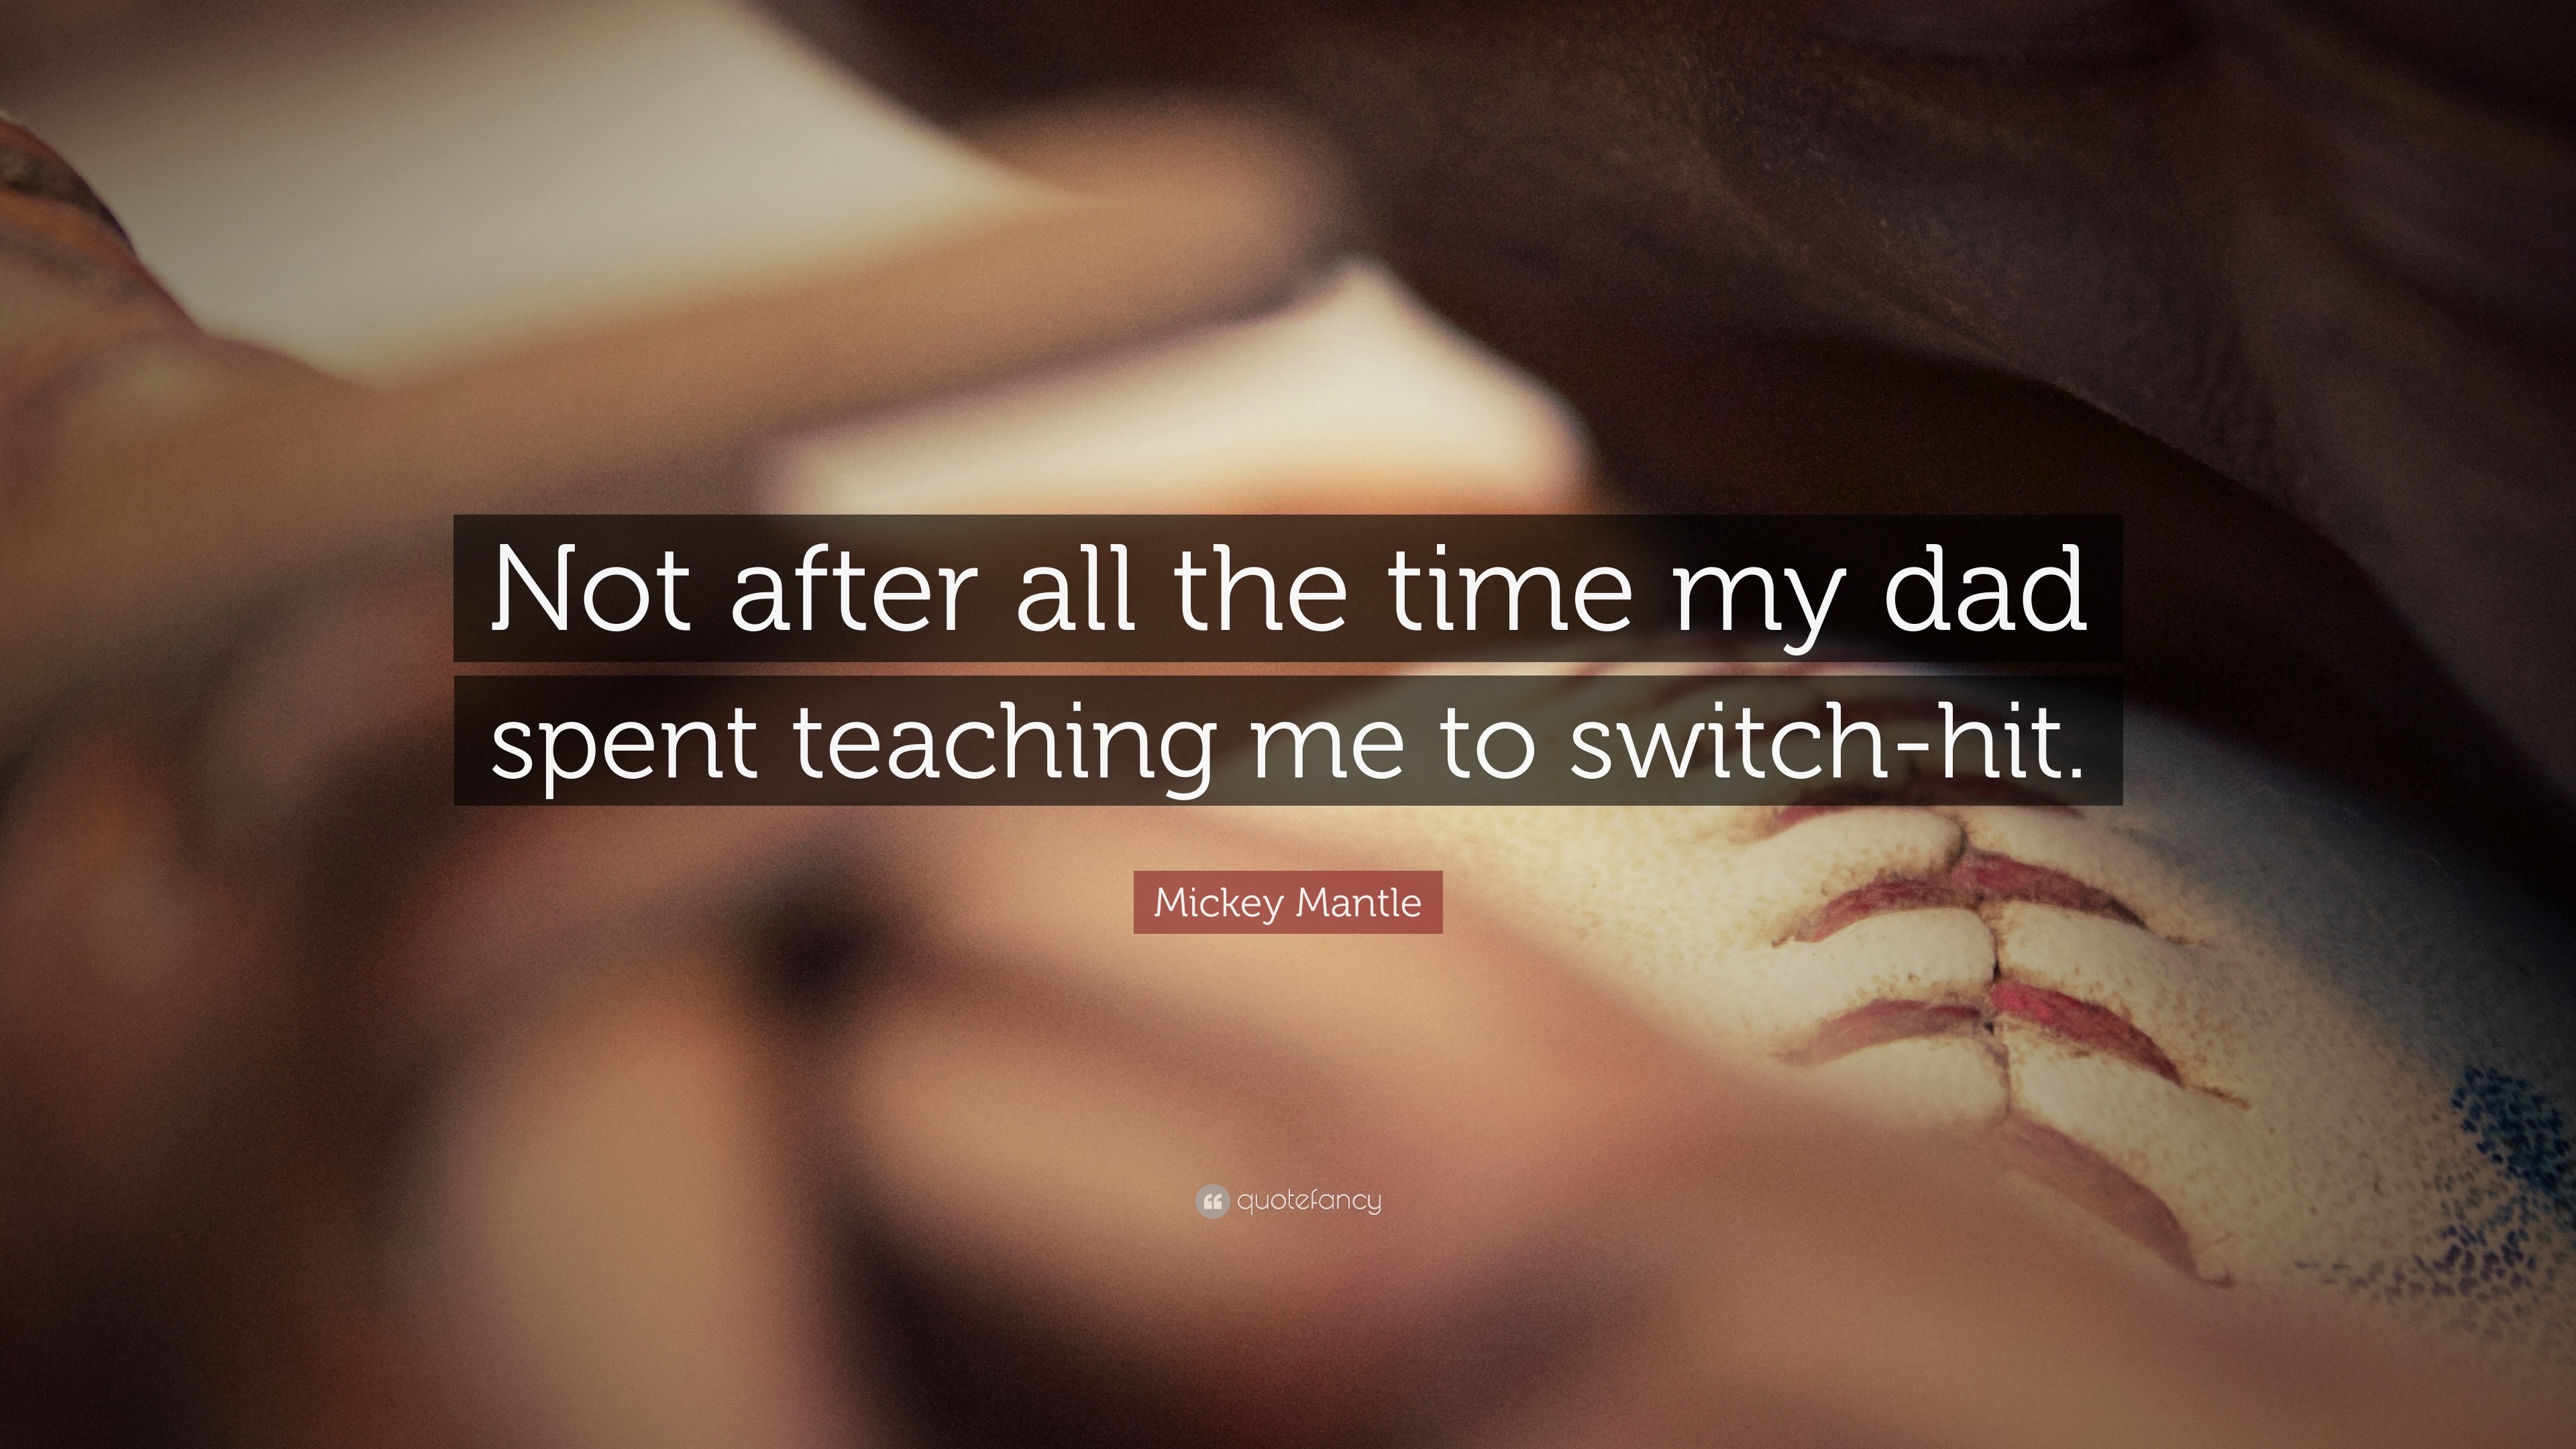 Mickey Mantle Quote Not after all the time my dad spent teaching me to